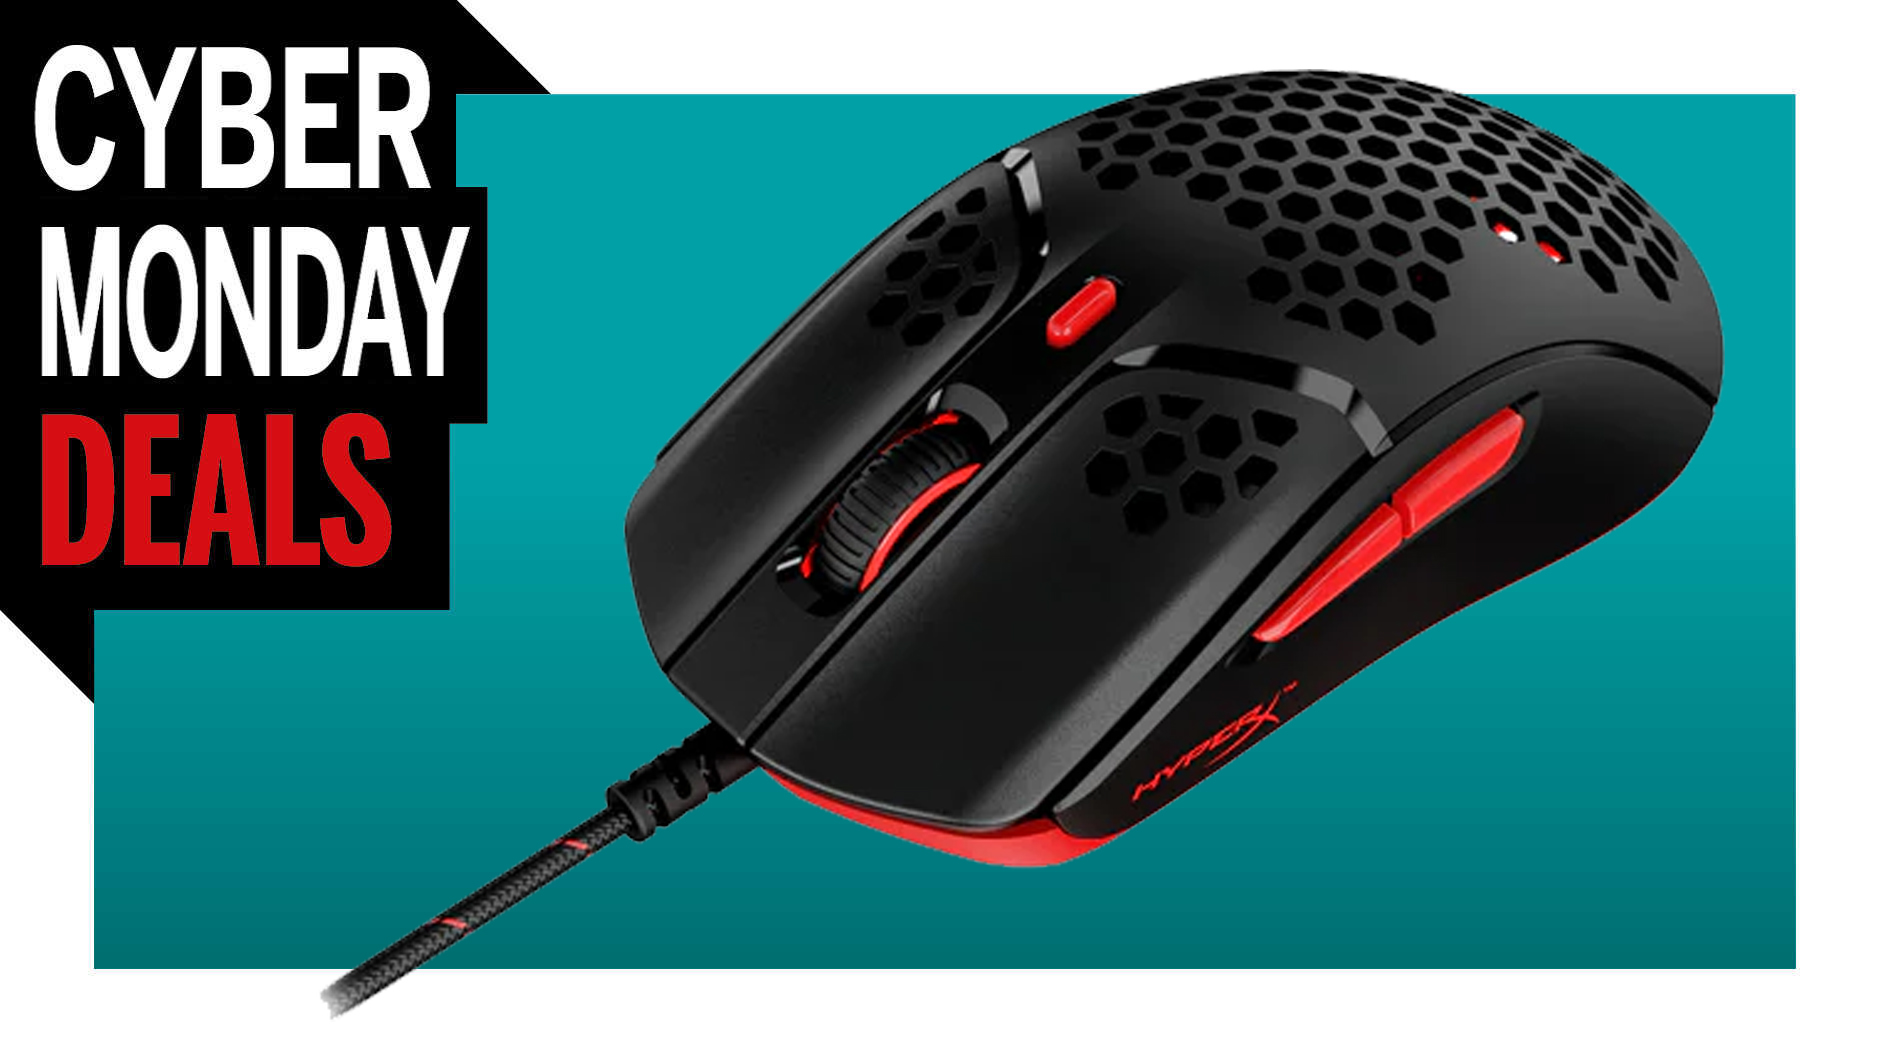  This light gaming mouse is only $25, its all-time lowest price for Cyber Monday 